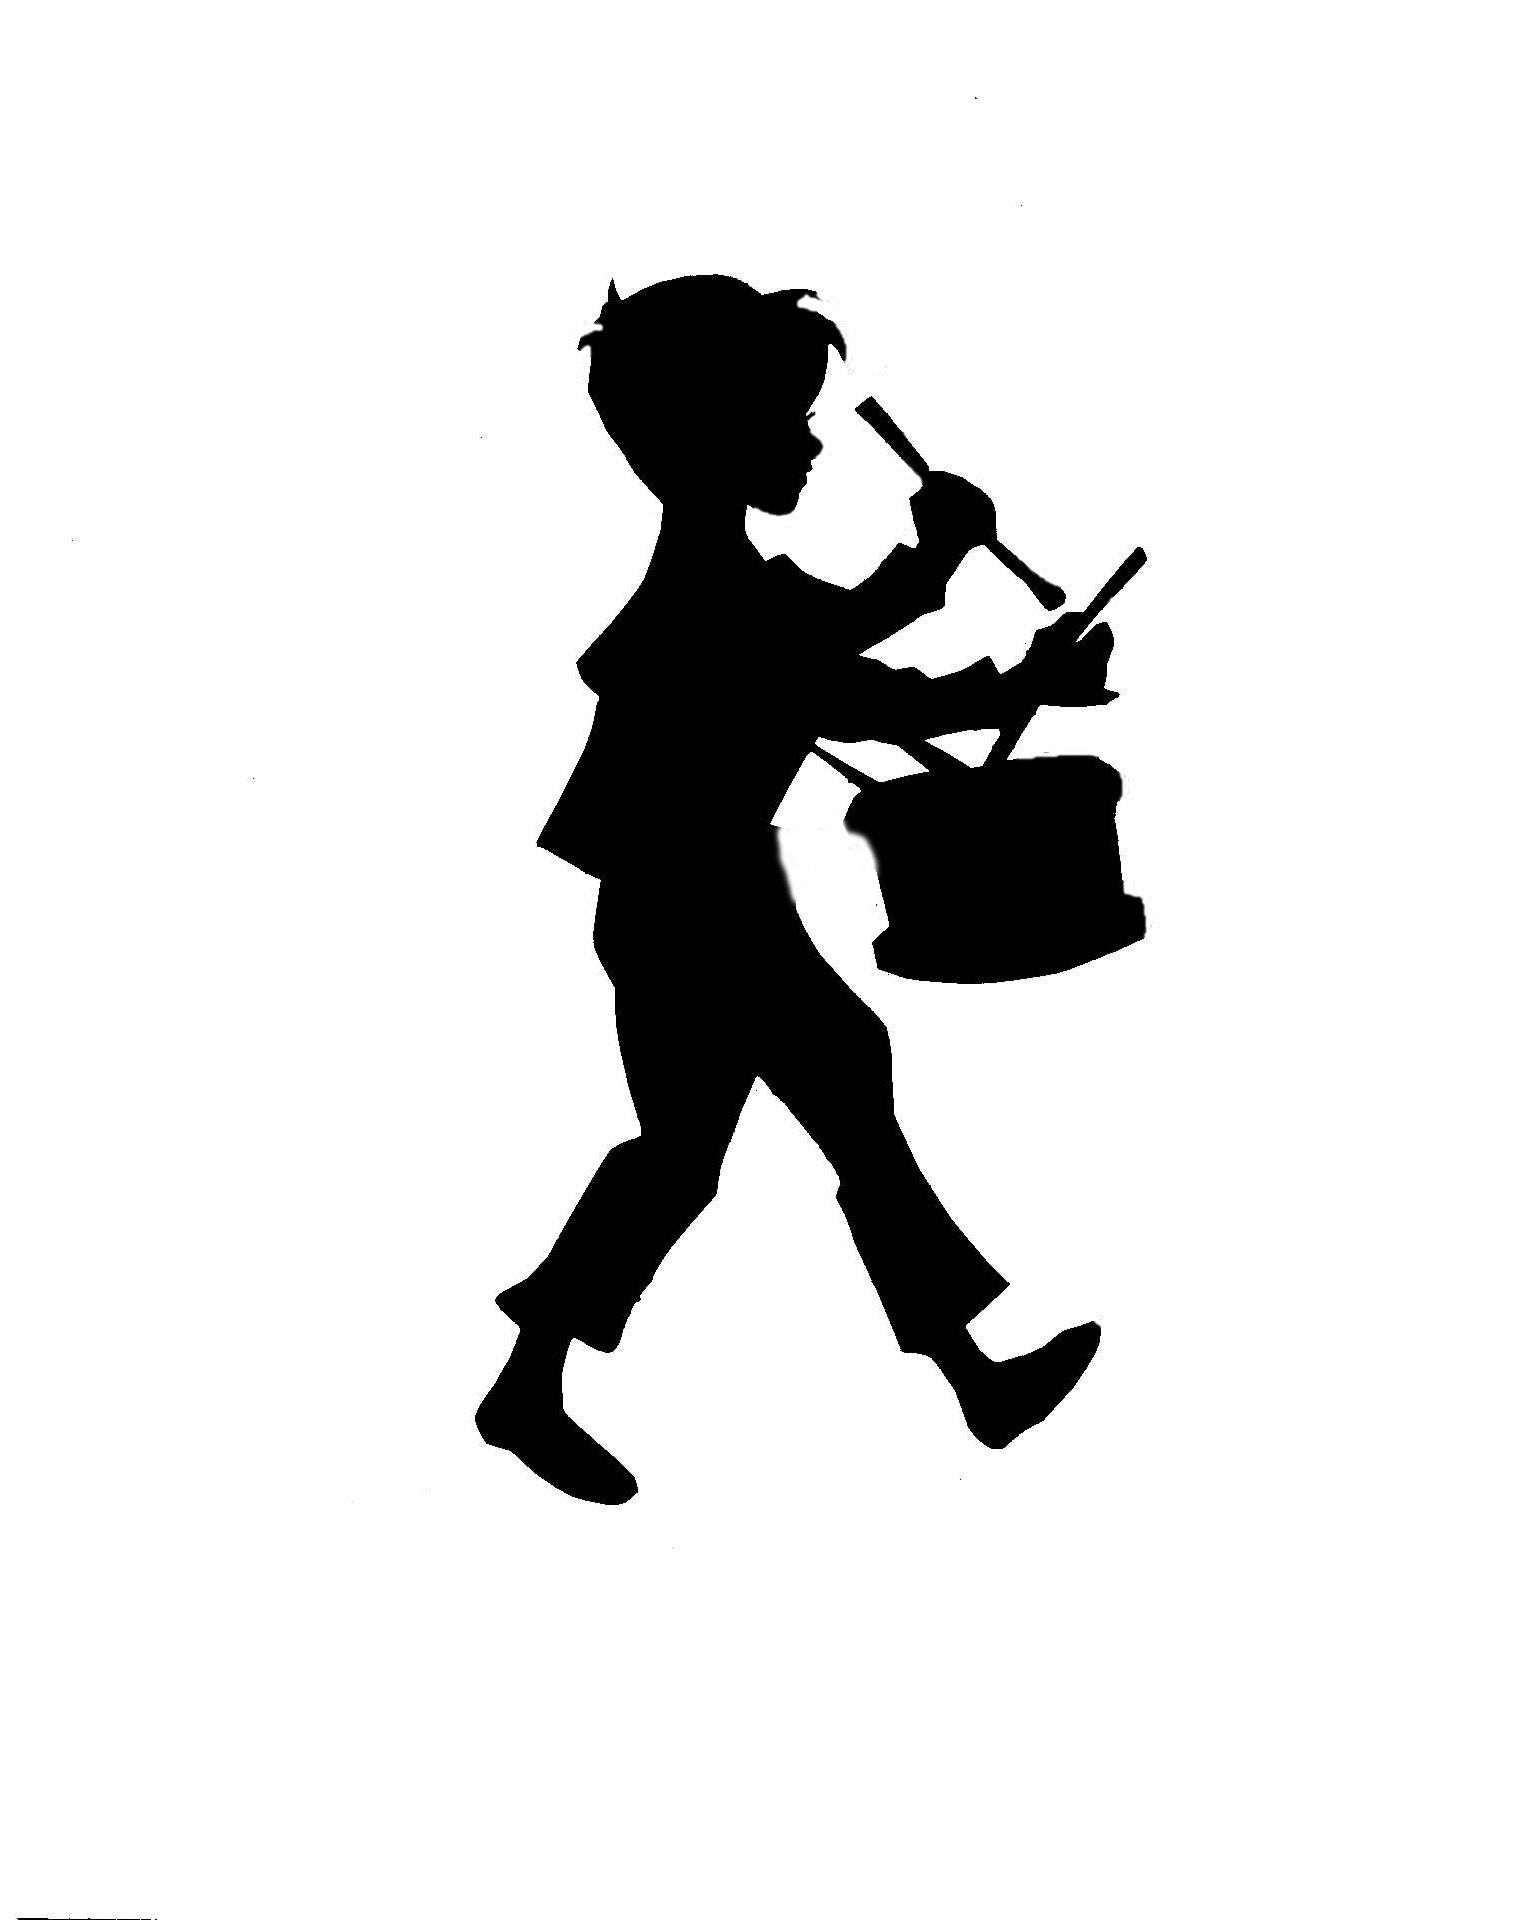 Little boy with a frog silhouette